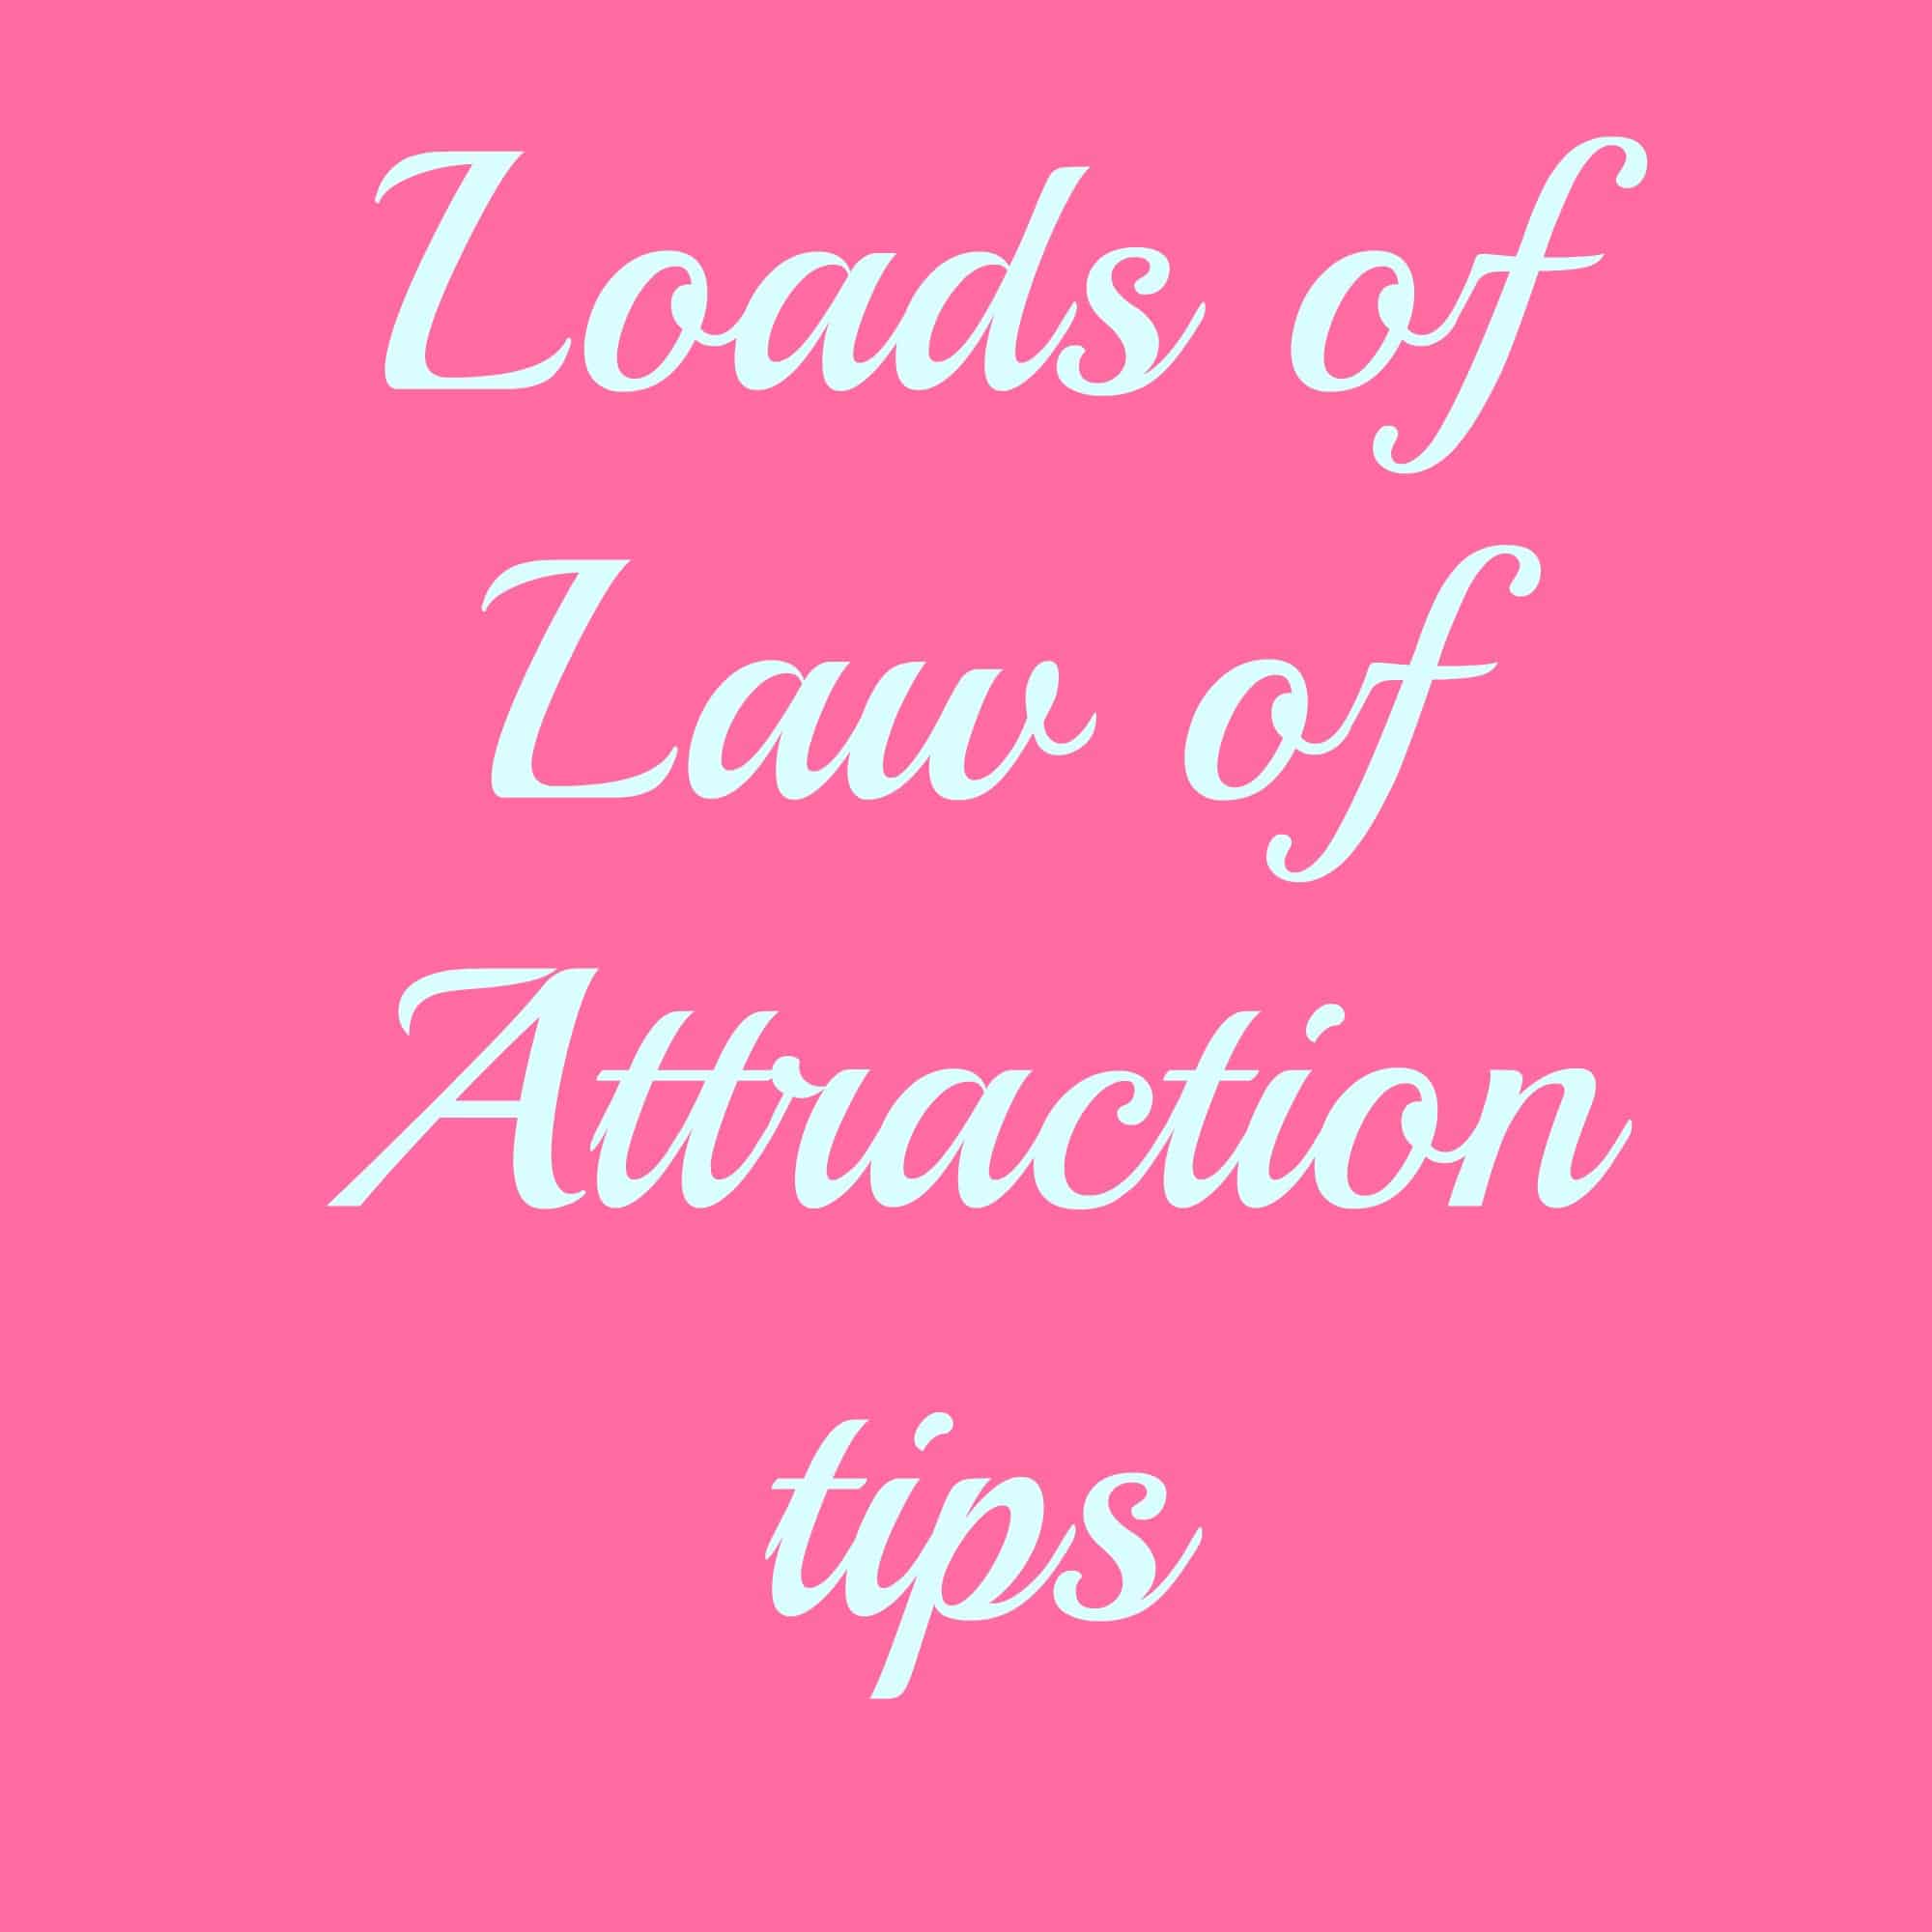 Loads of Law of attraction tips to help you start attracting the things you want.